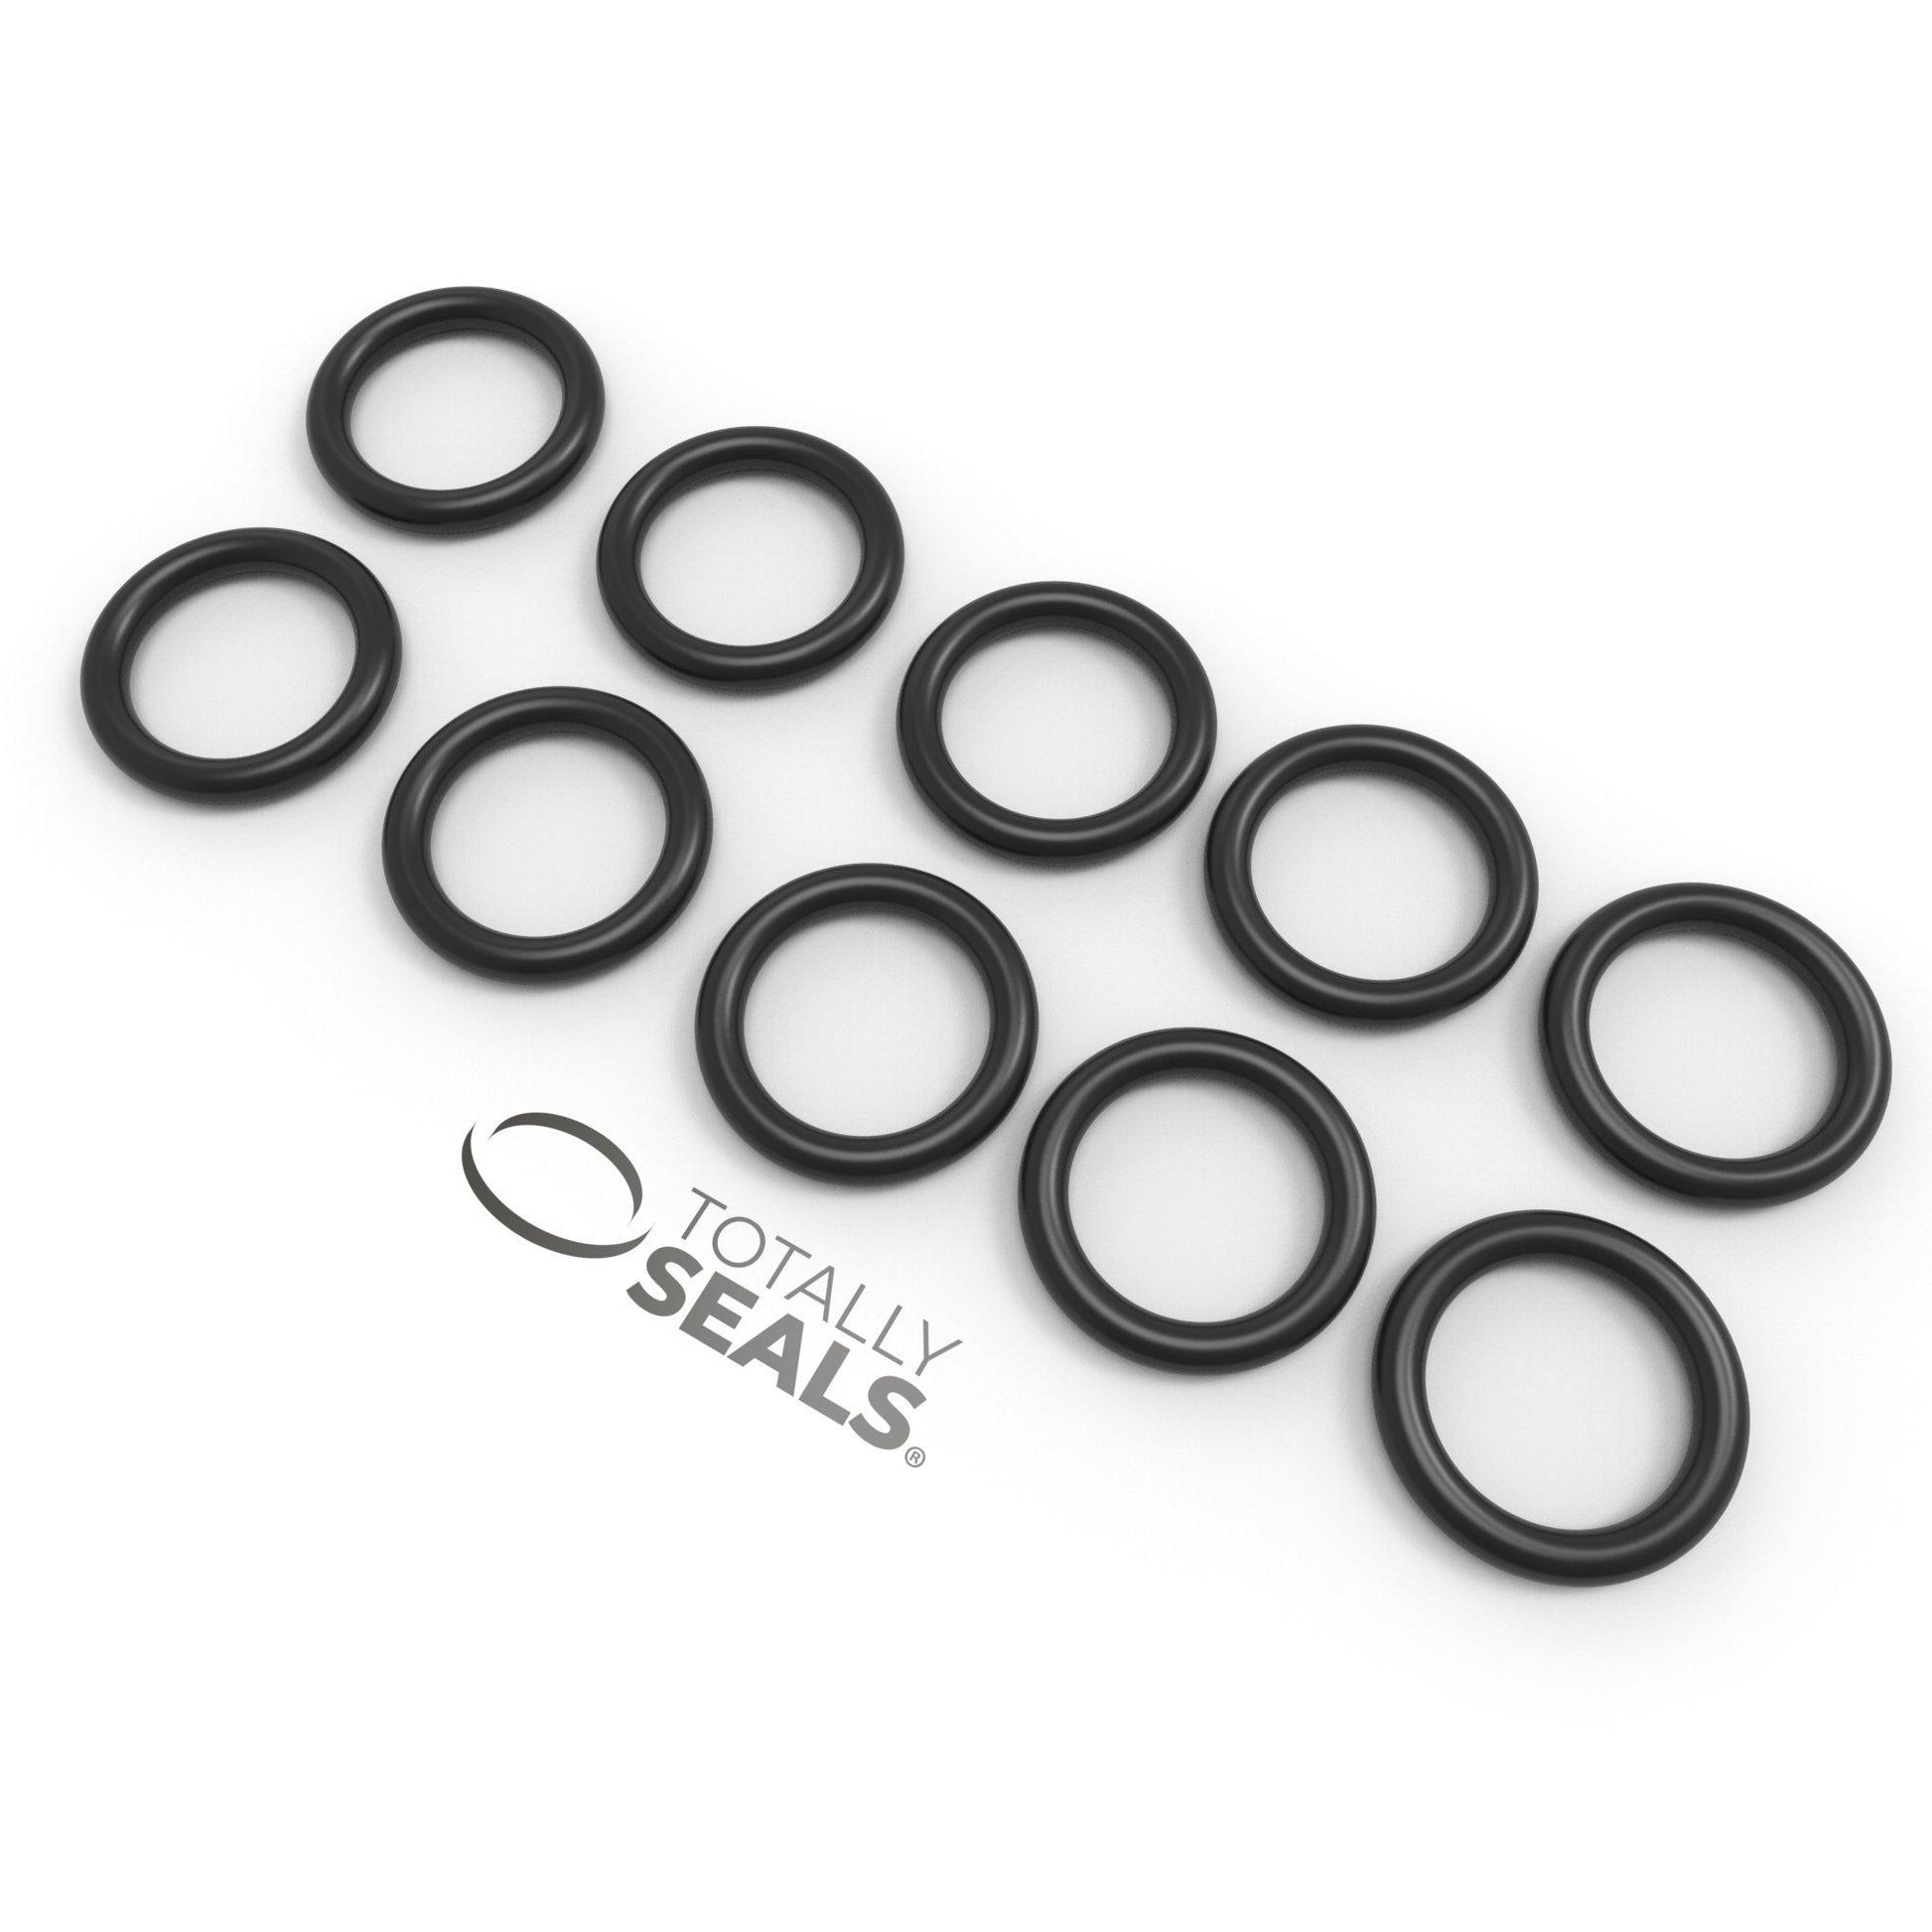 8mm x 1.5mm (11mm OD) Nitrile O-Rings - Totally Seals®